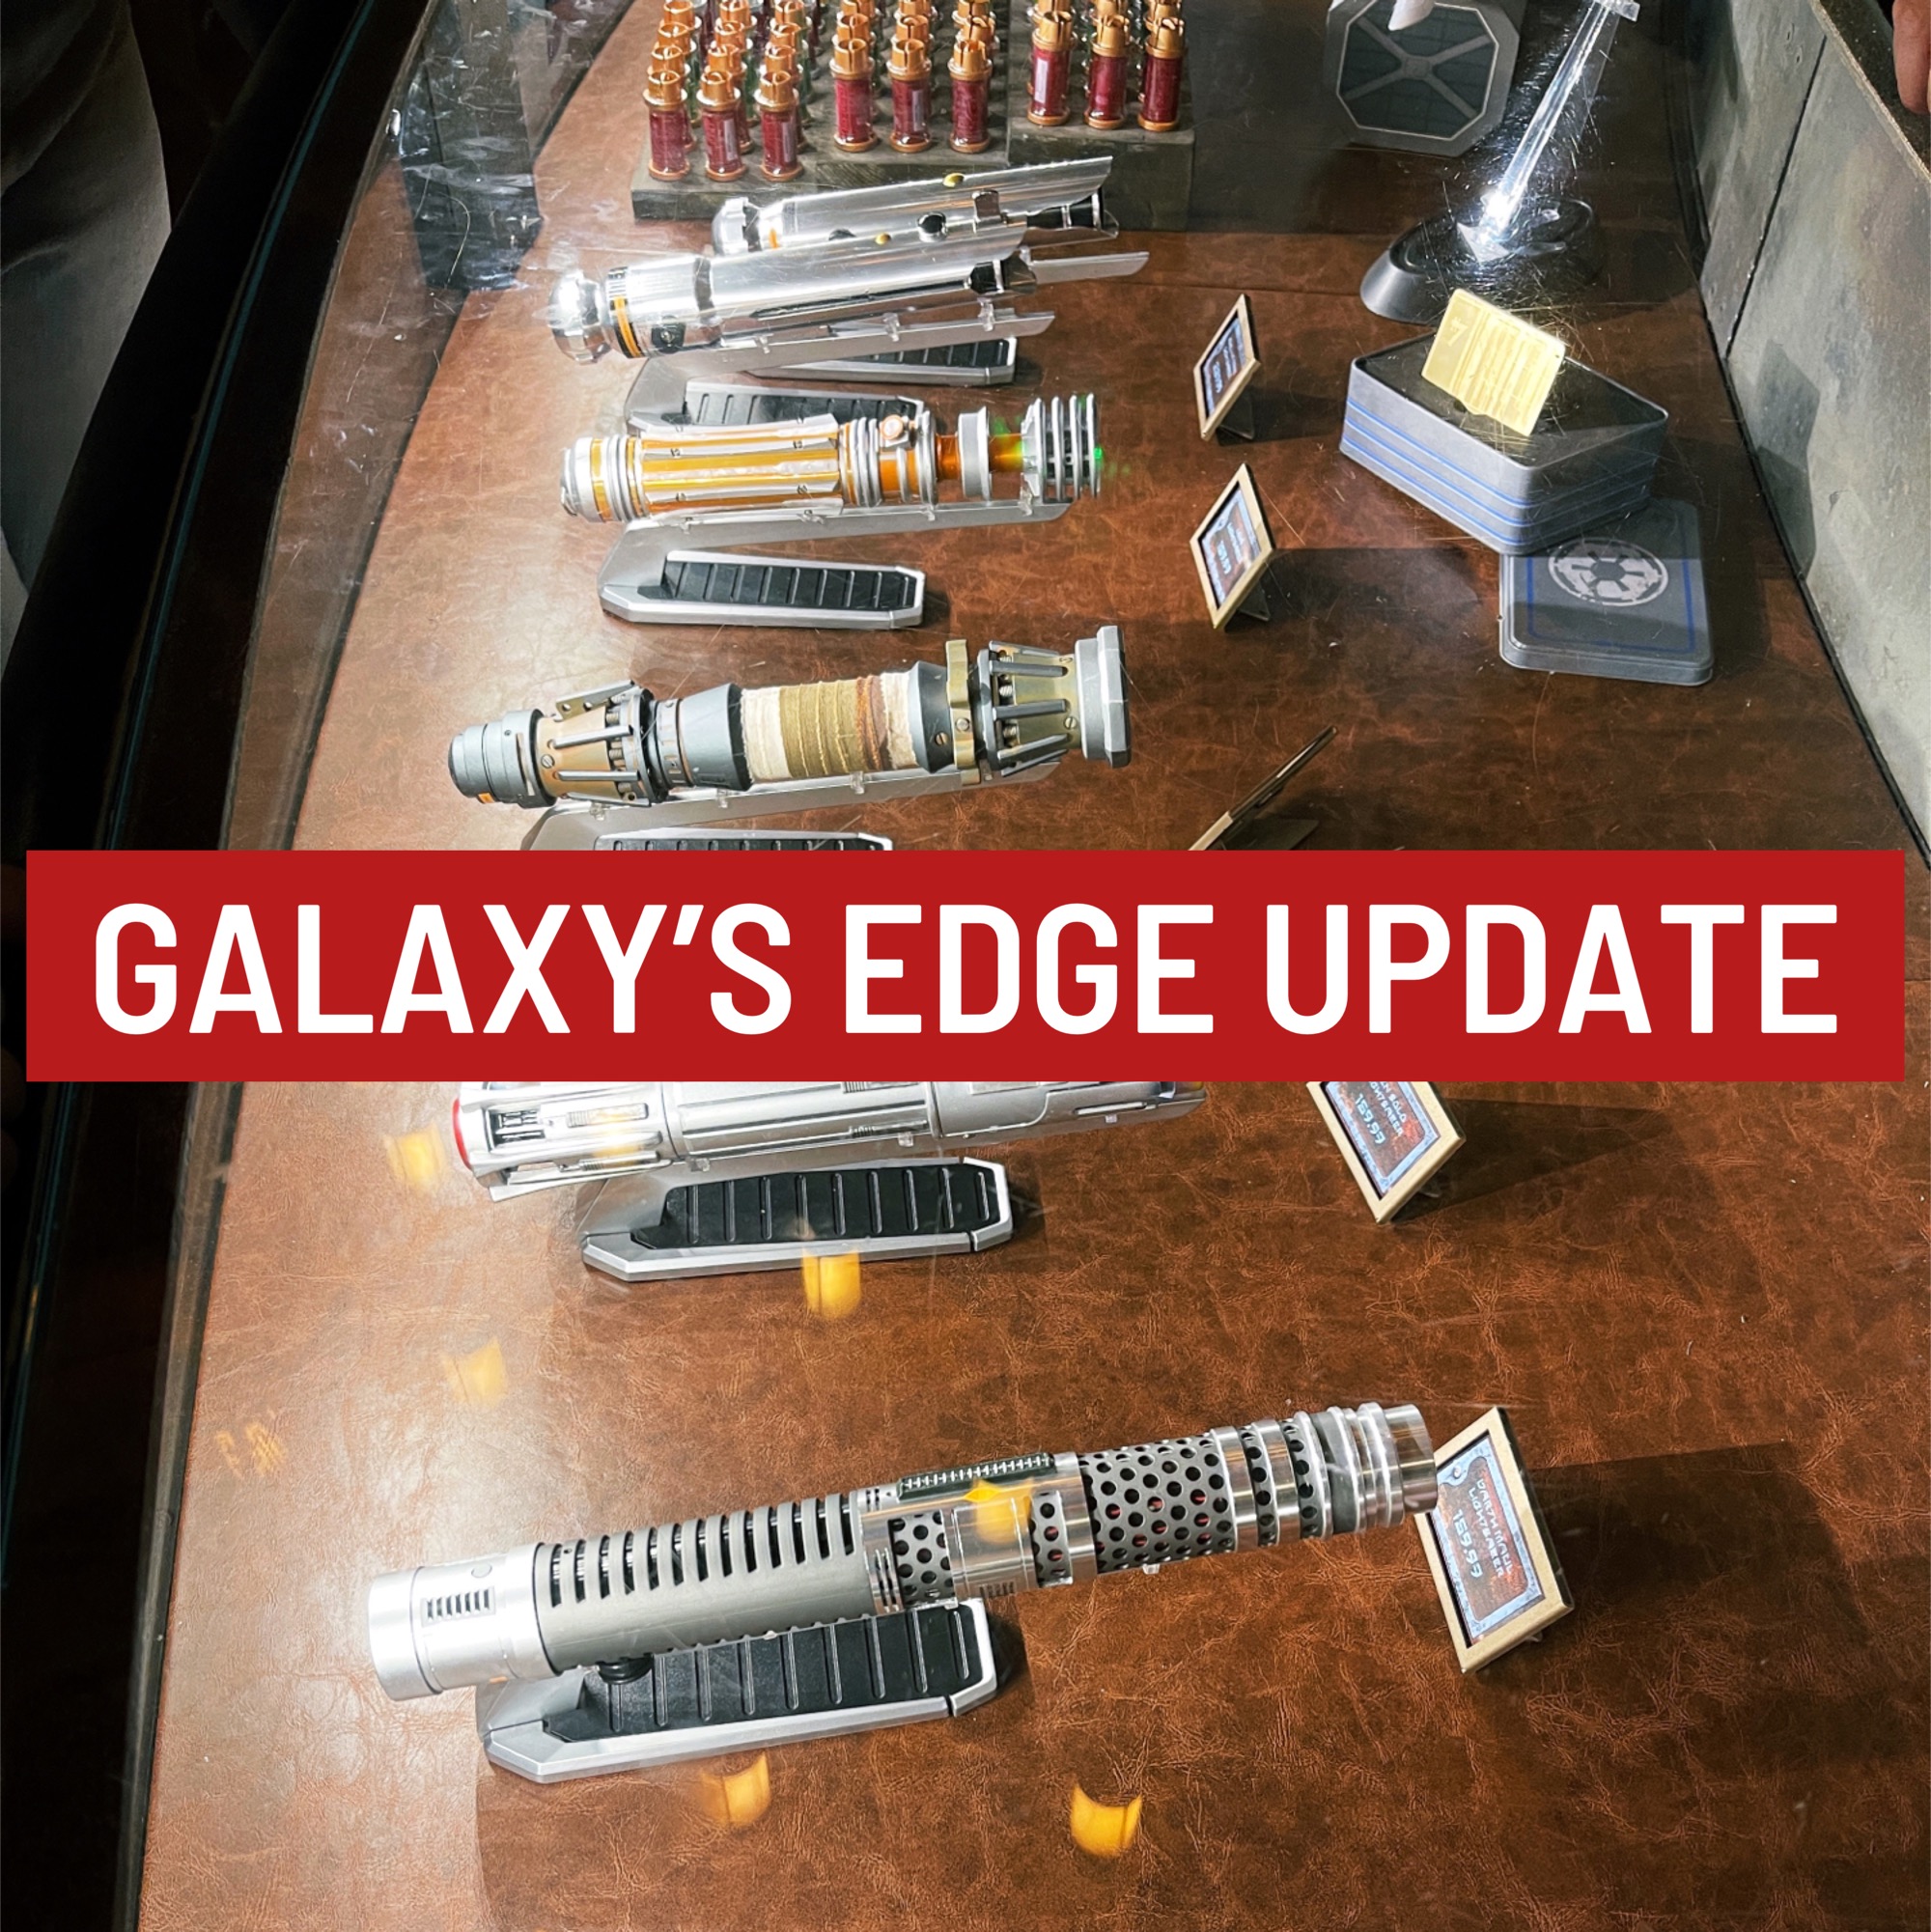 Star Wars: Galaxy's Edge Update - Maul Shadow Legacy Lightsaber, Poe's Bandolier & More!